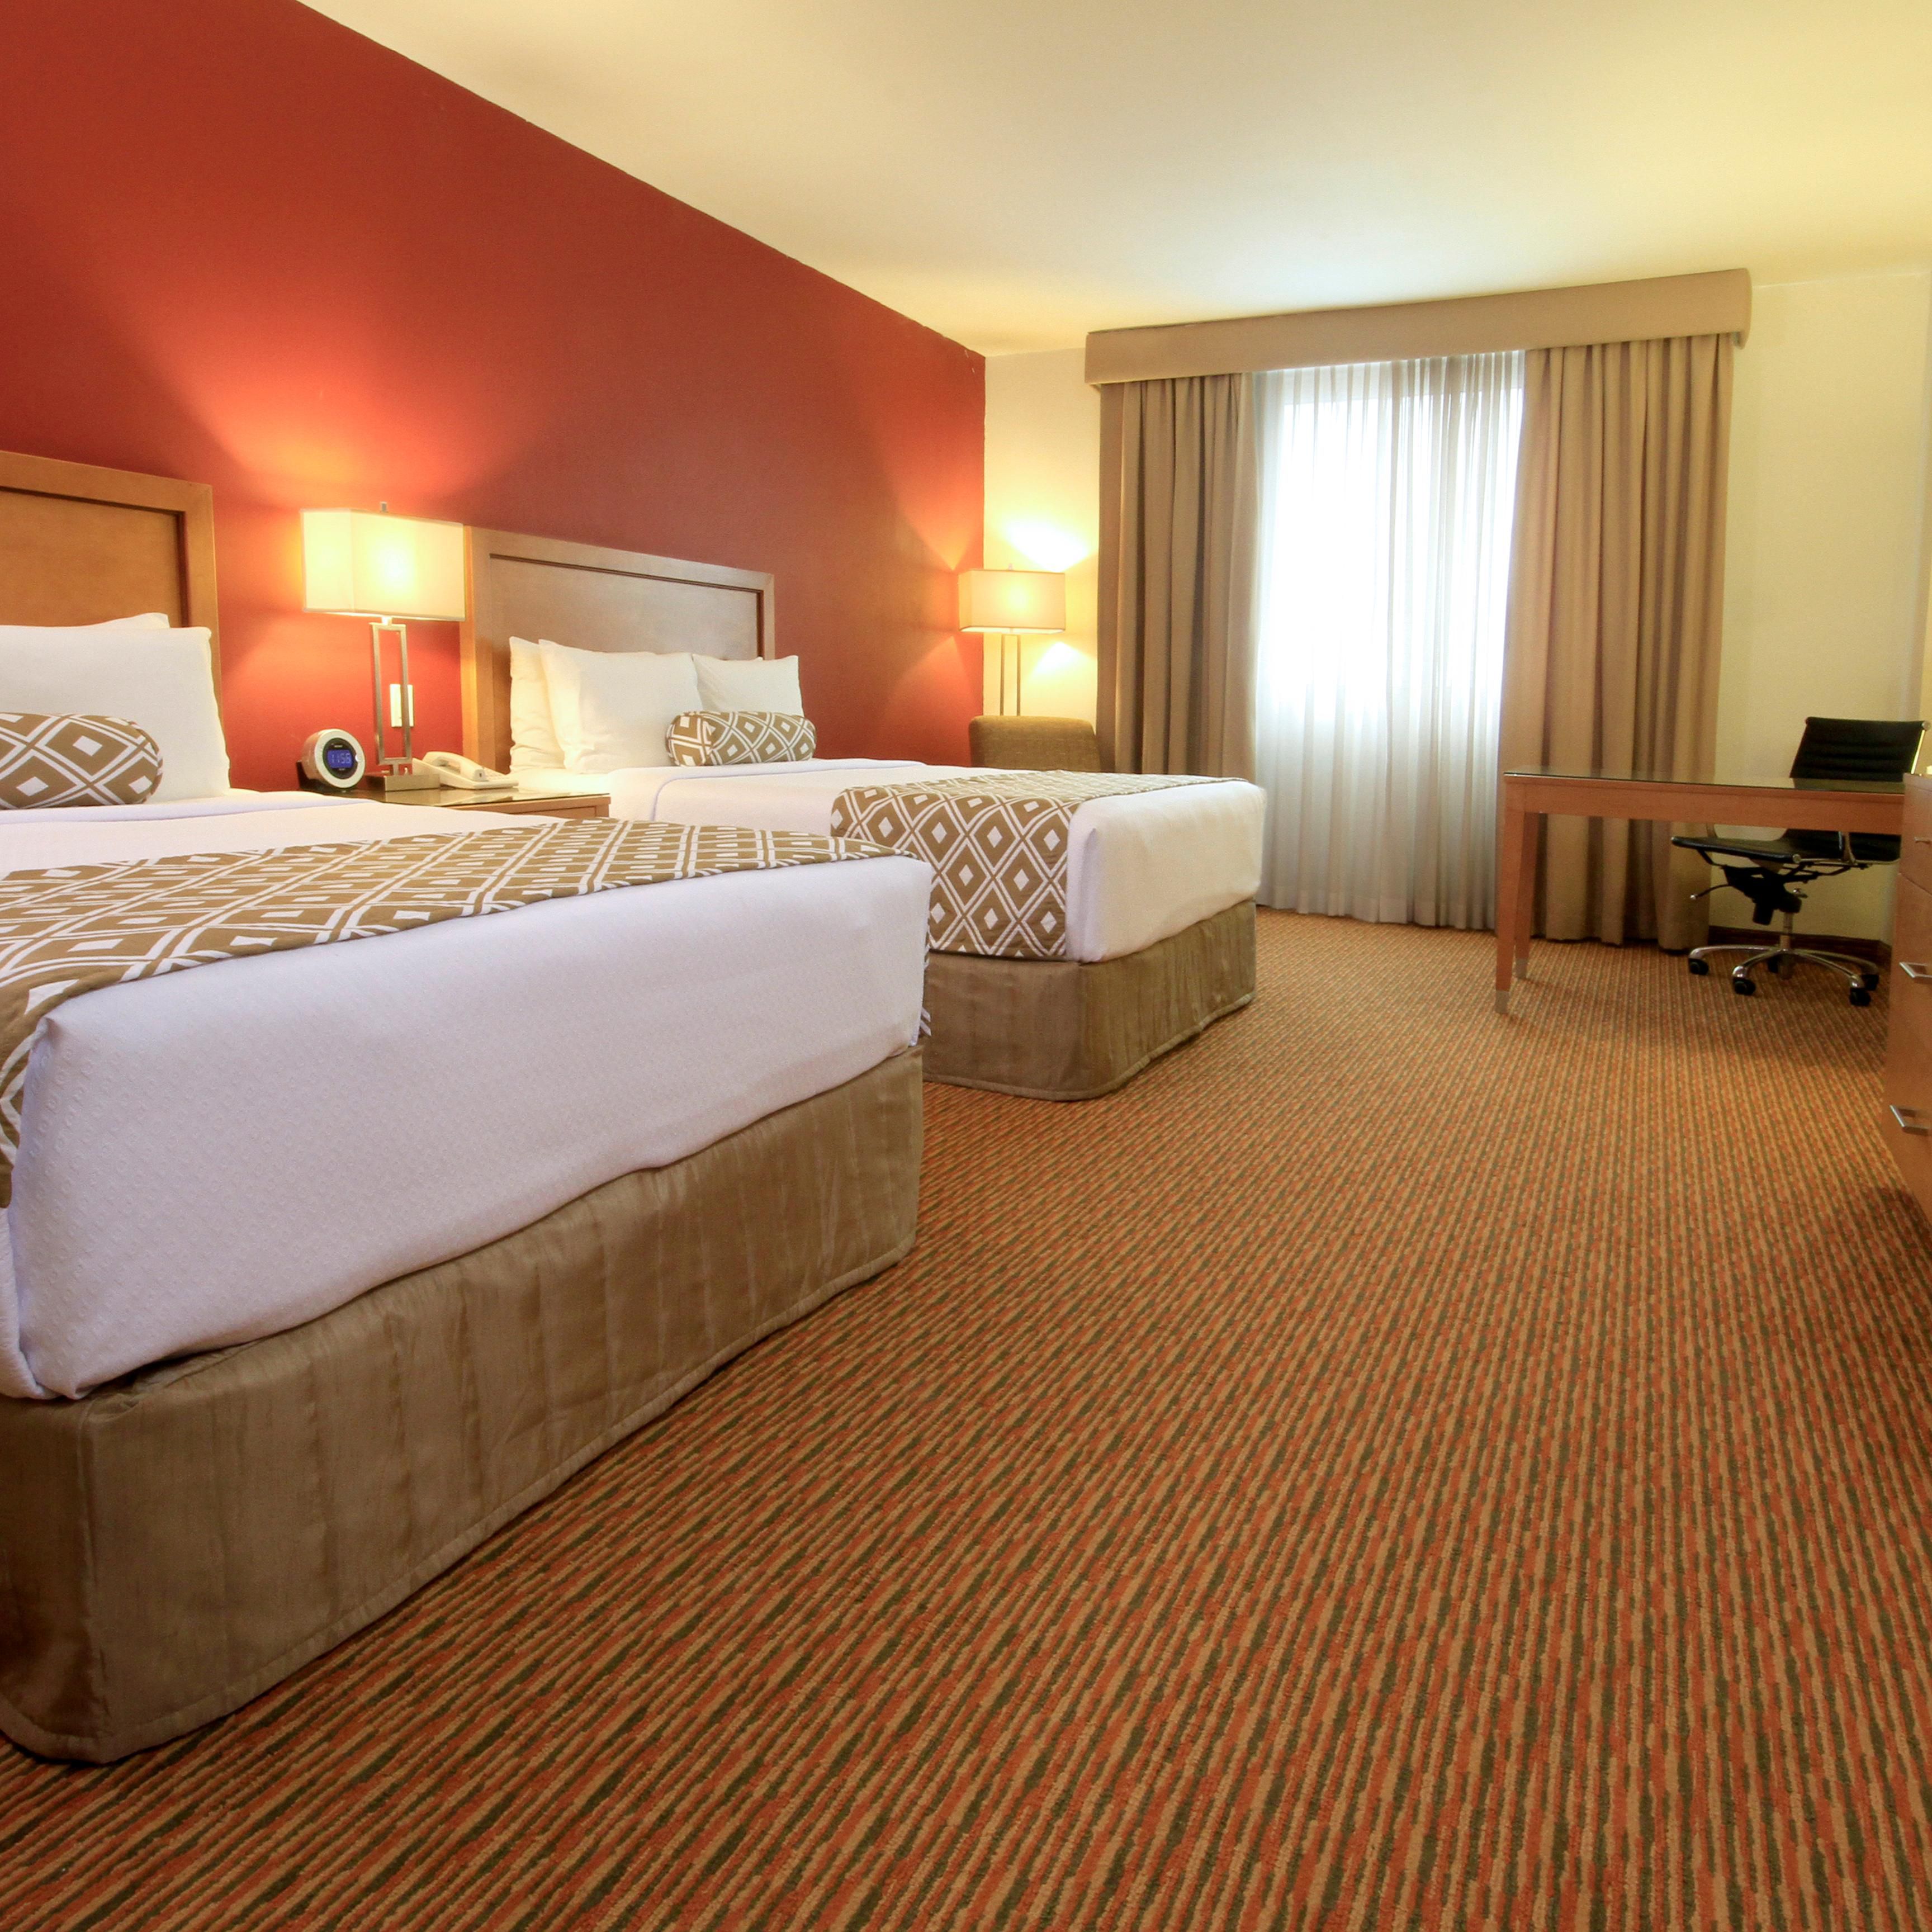 Our rooms are designed for corporate and leisure traveler alike.